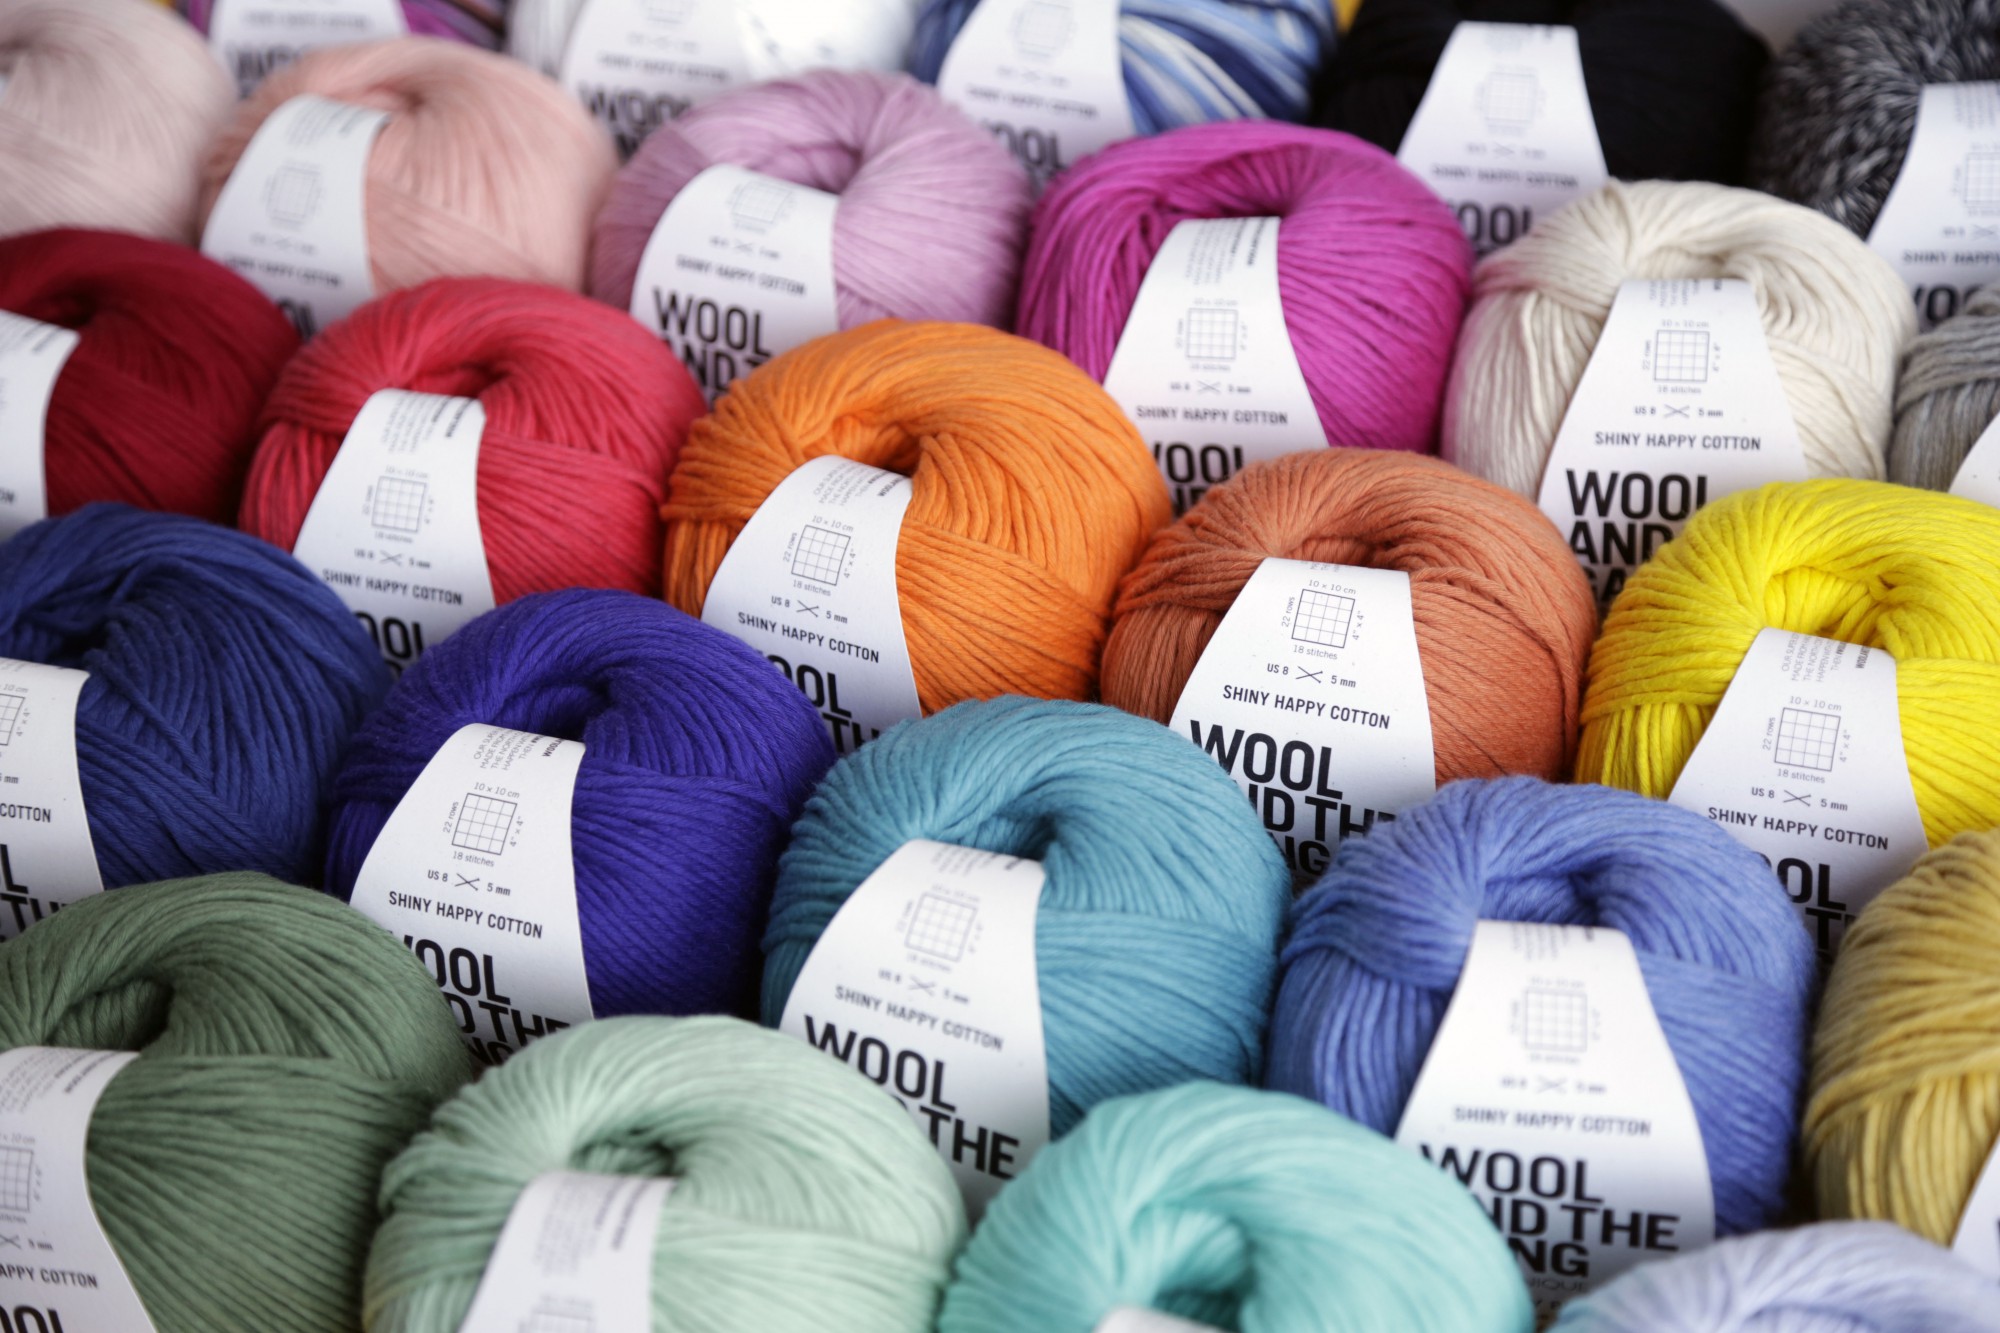 Pure Cotton Yarn For Knitting And Crochet Great For Blankets